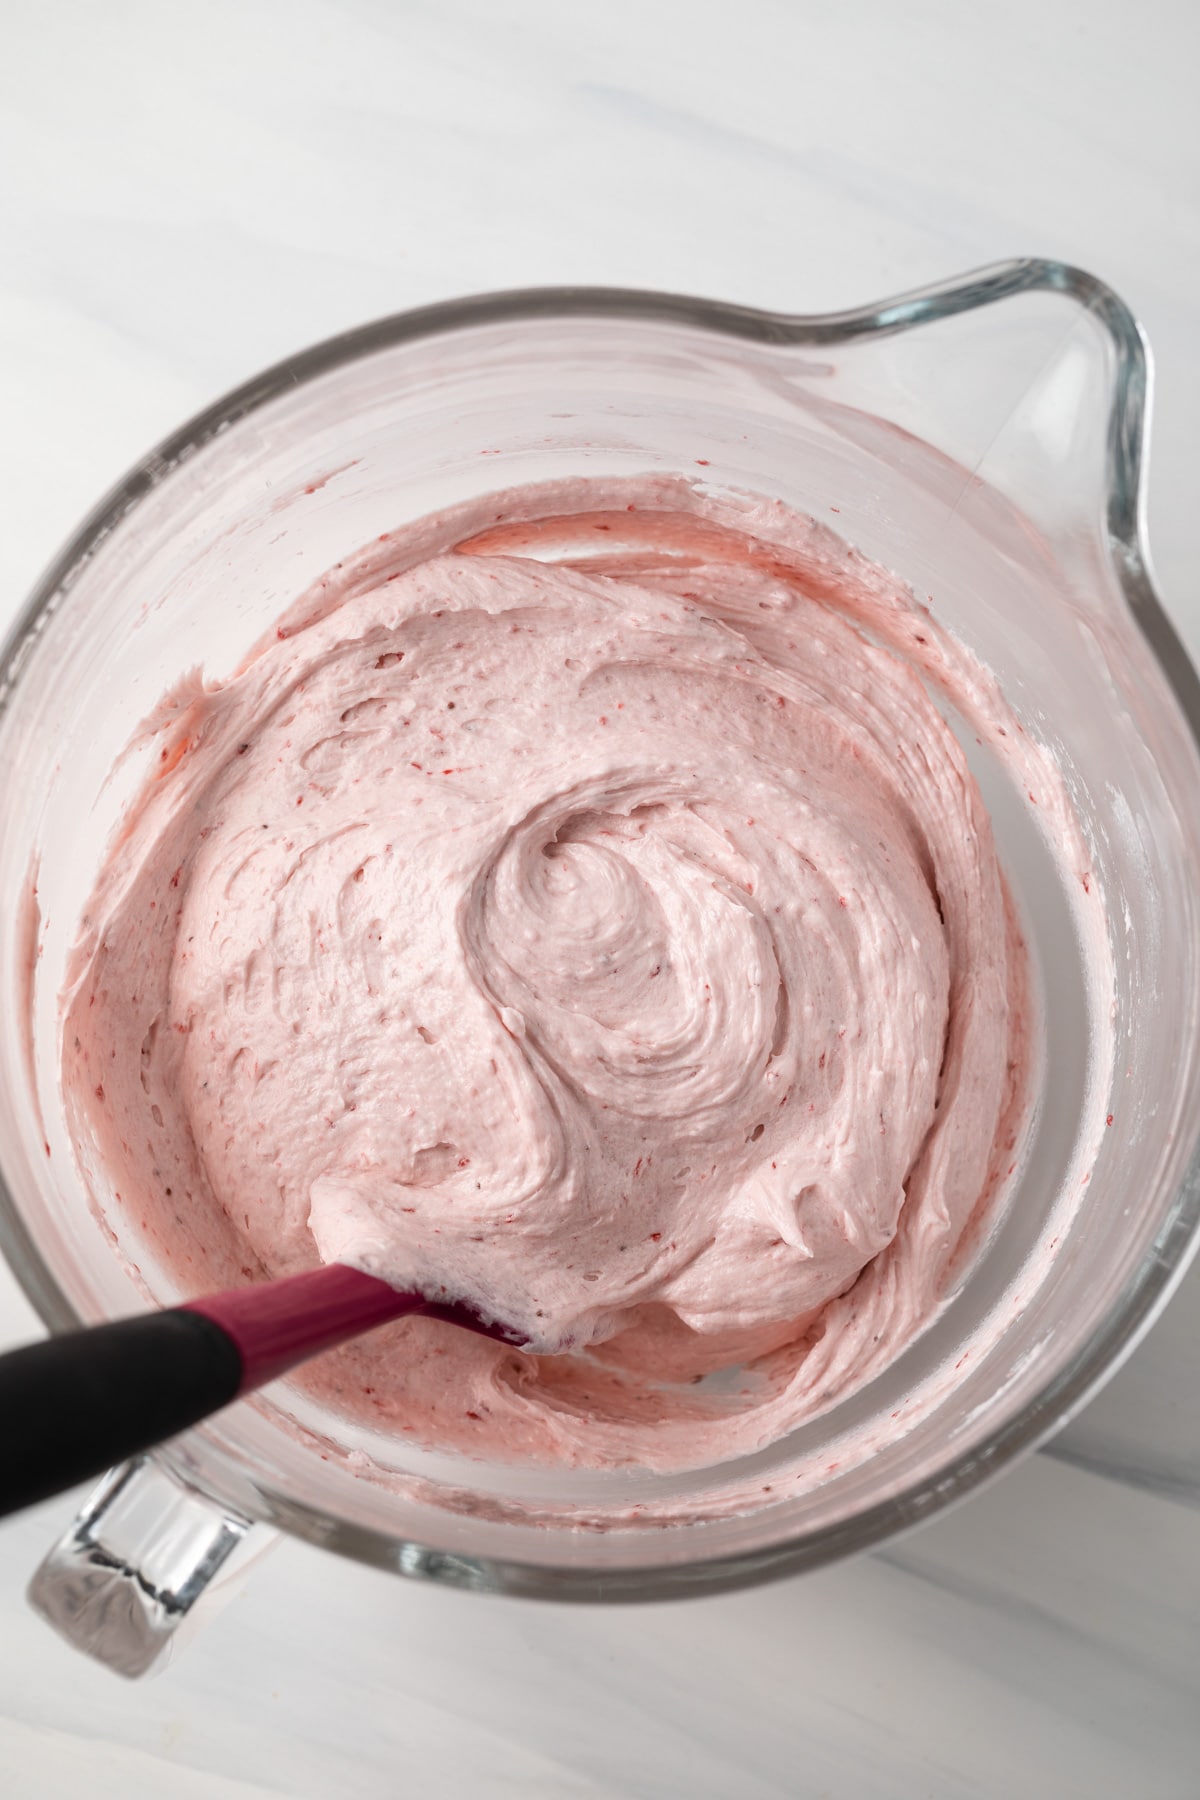 Strawberry buttercream frosting in a glass bowl.